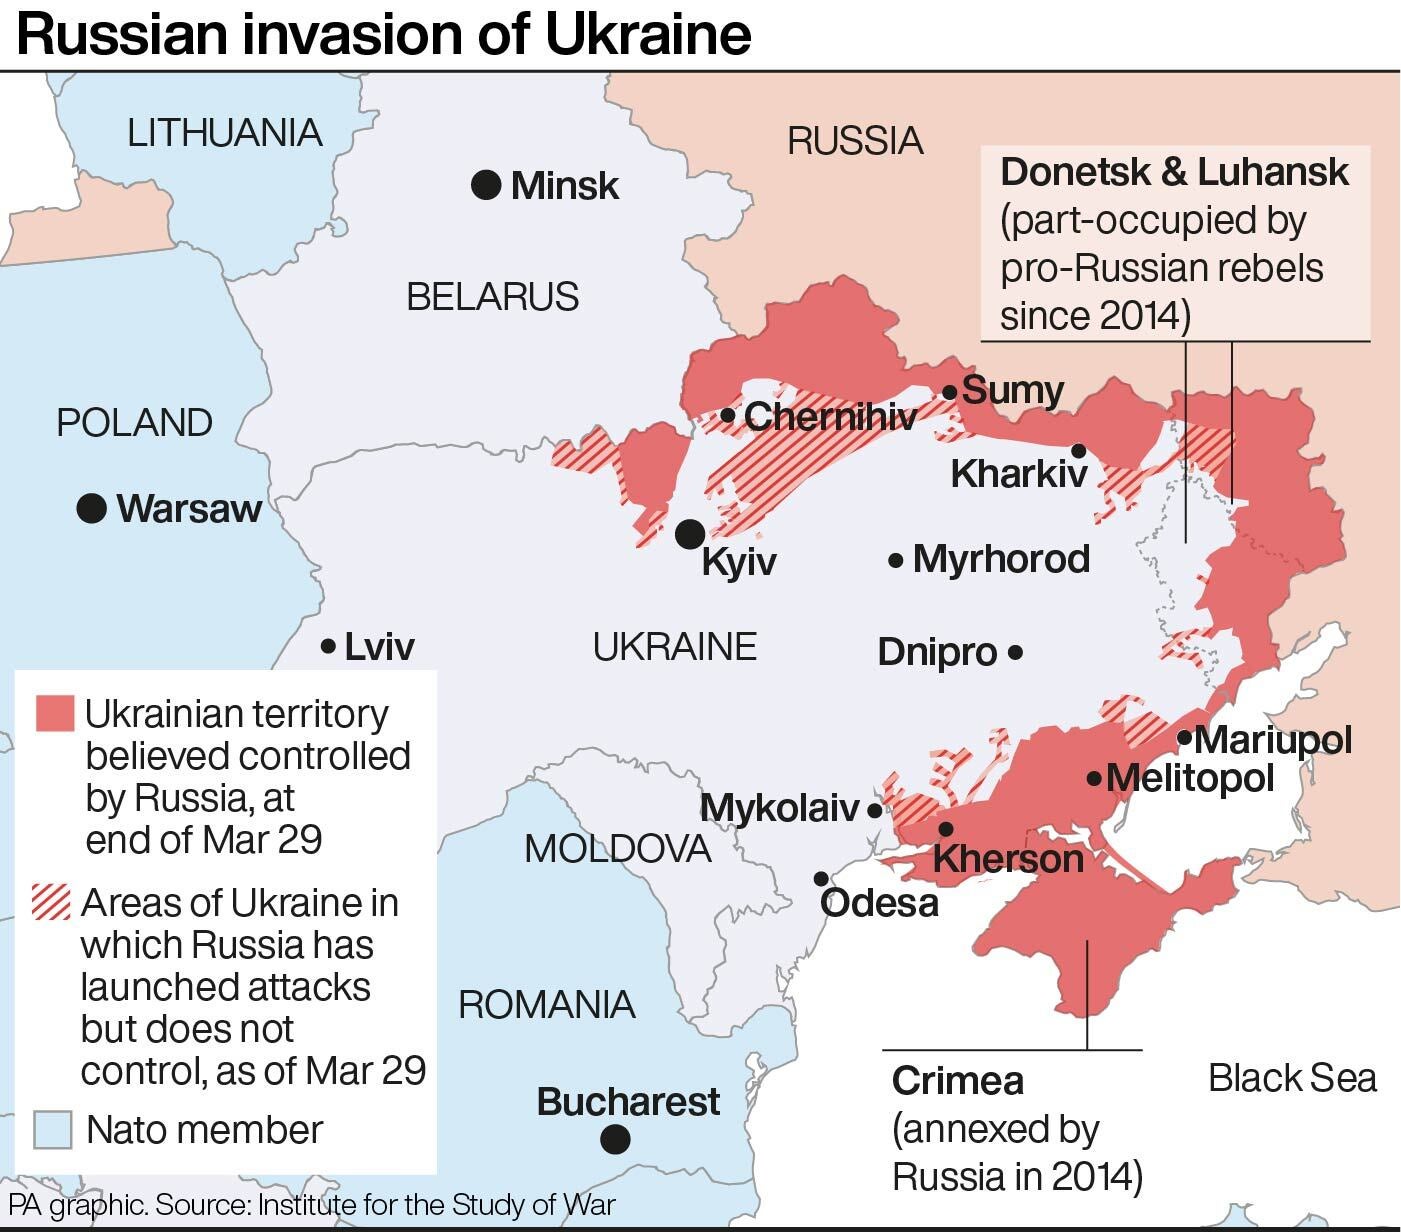 This map shows the extent of the Russian invasion of Ukraine